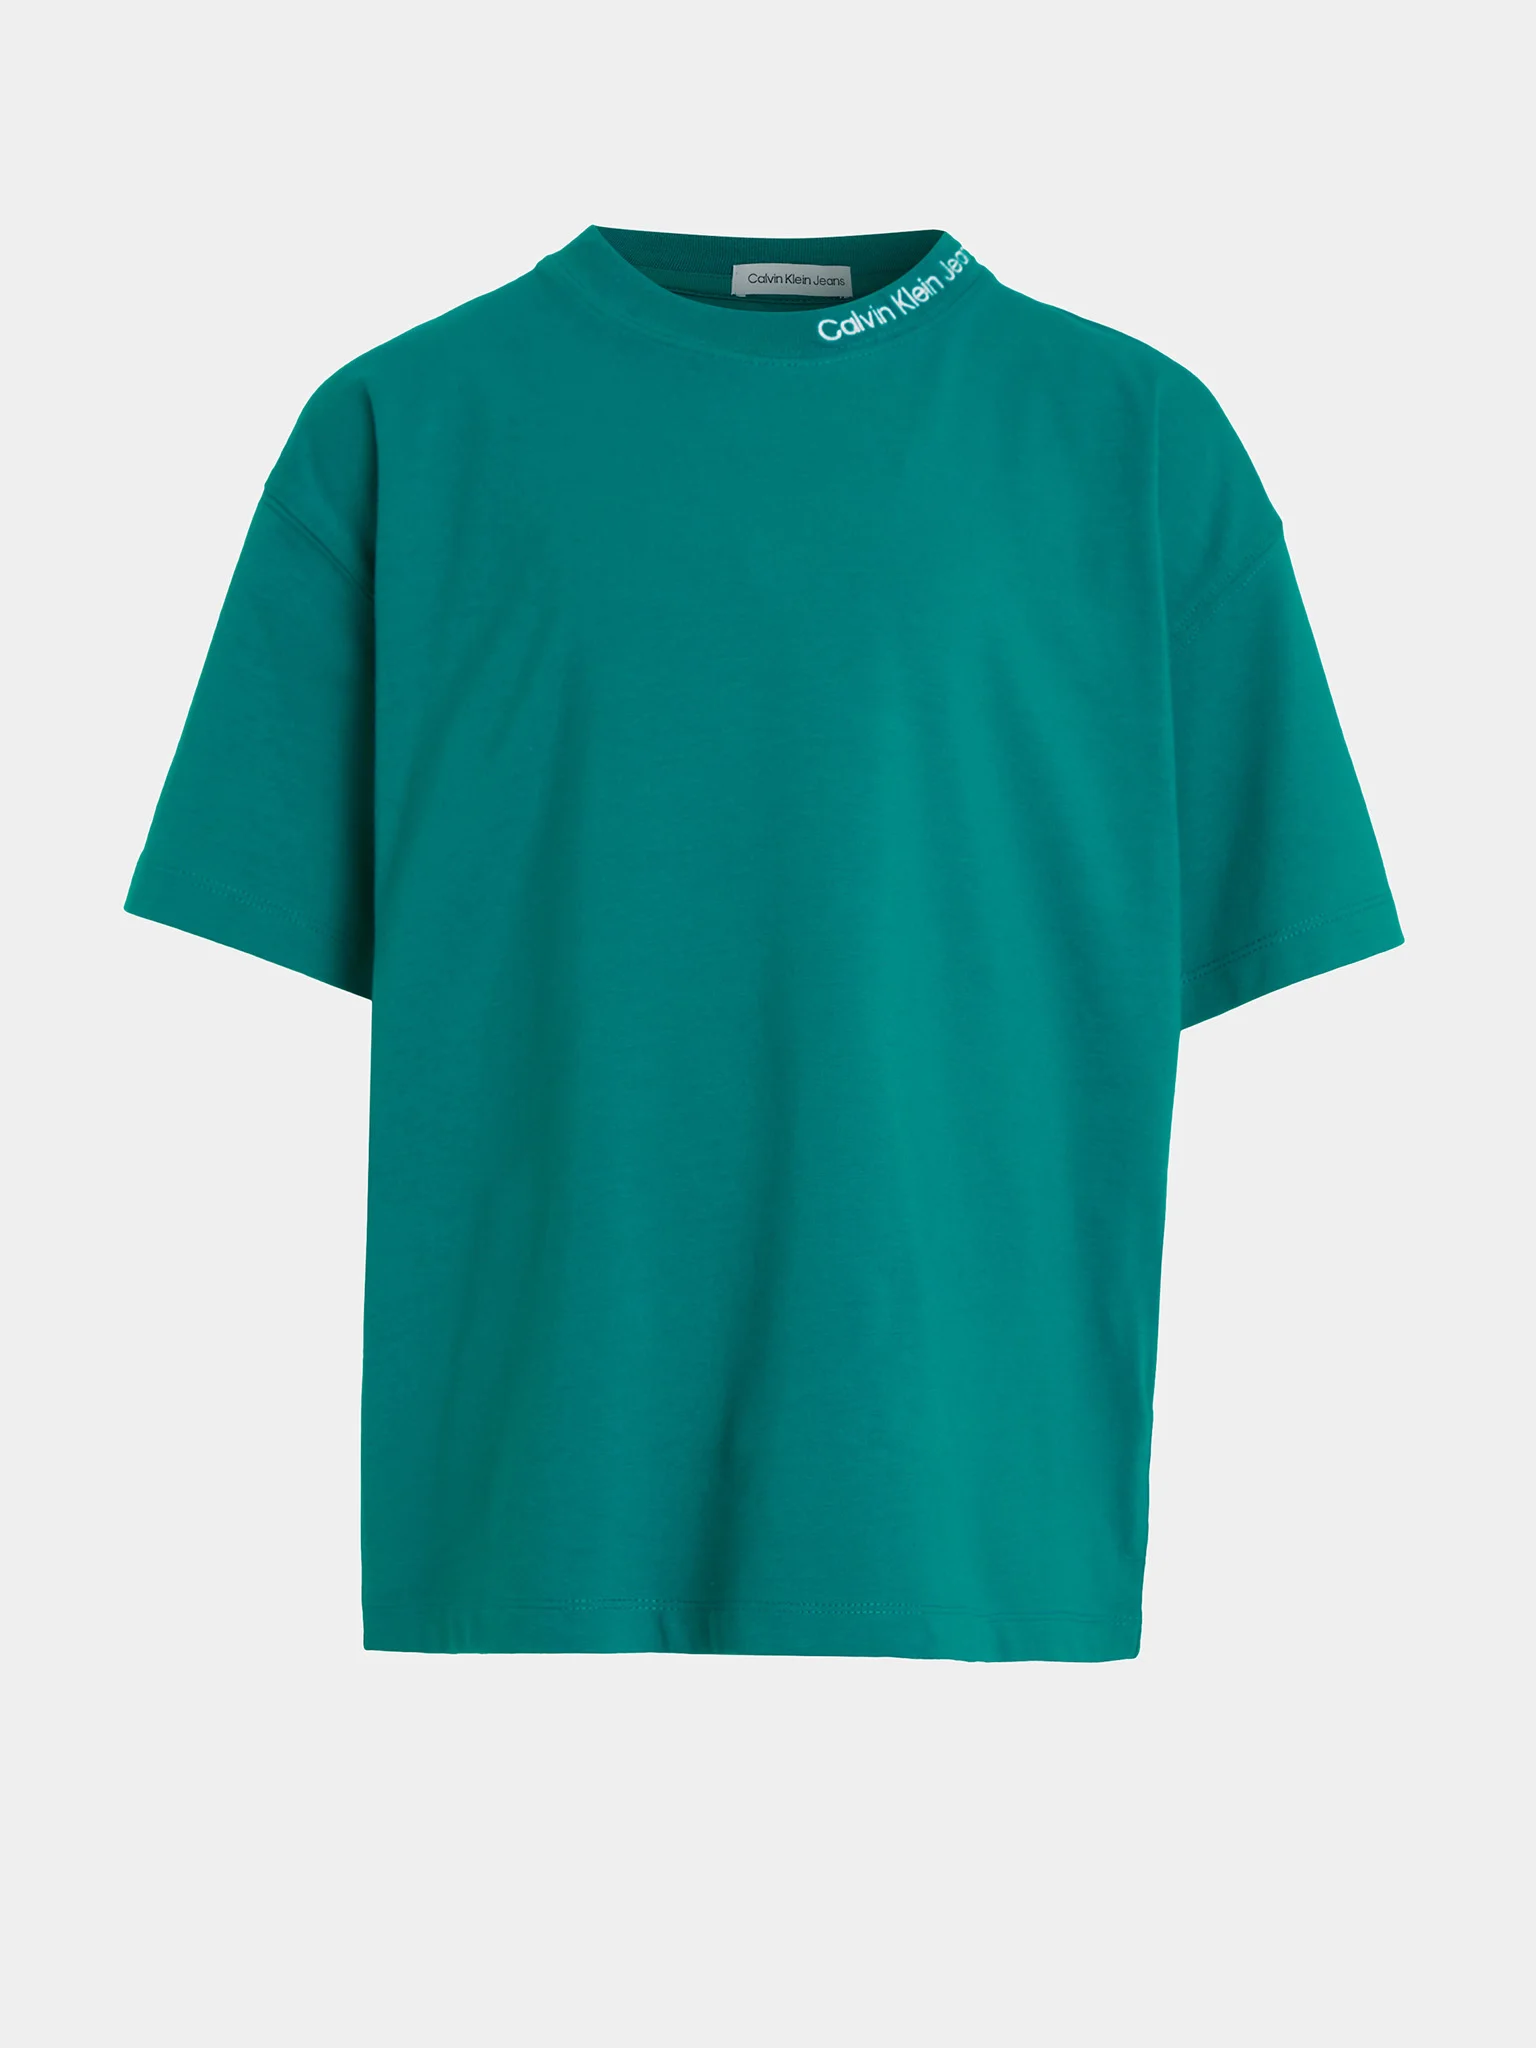 calvin-klein-jeans-t-shirt-intrasia-ib0ib02032-verde-relaxed-fit-00003034103392